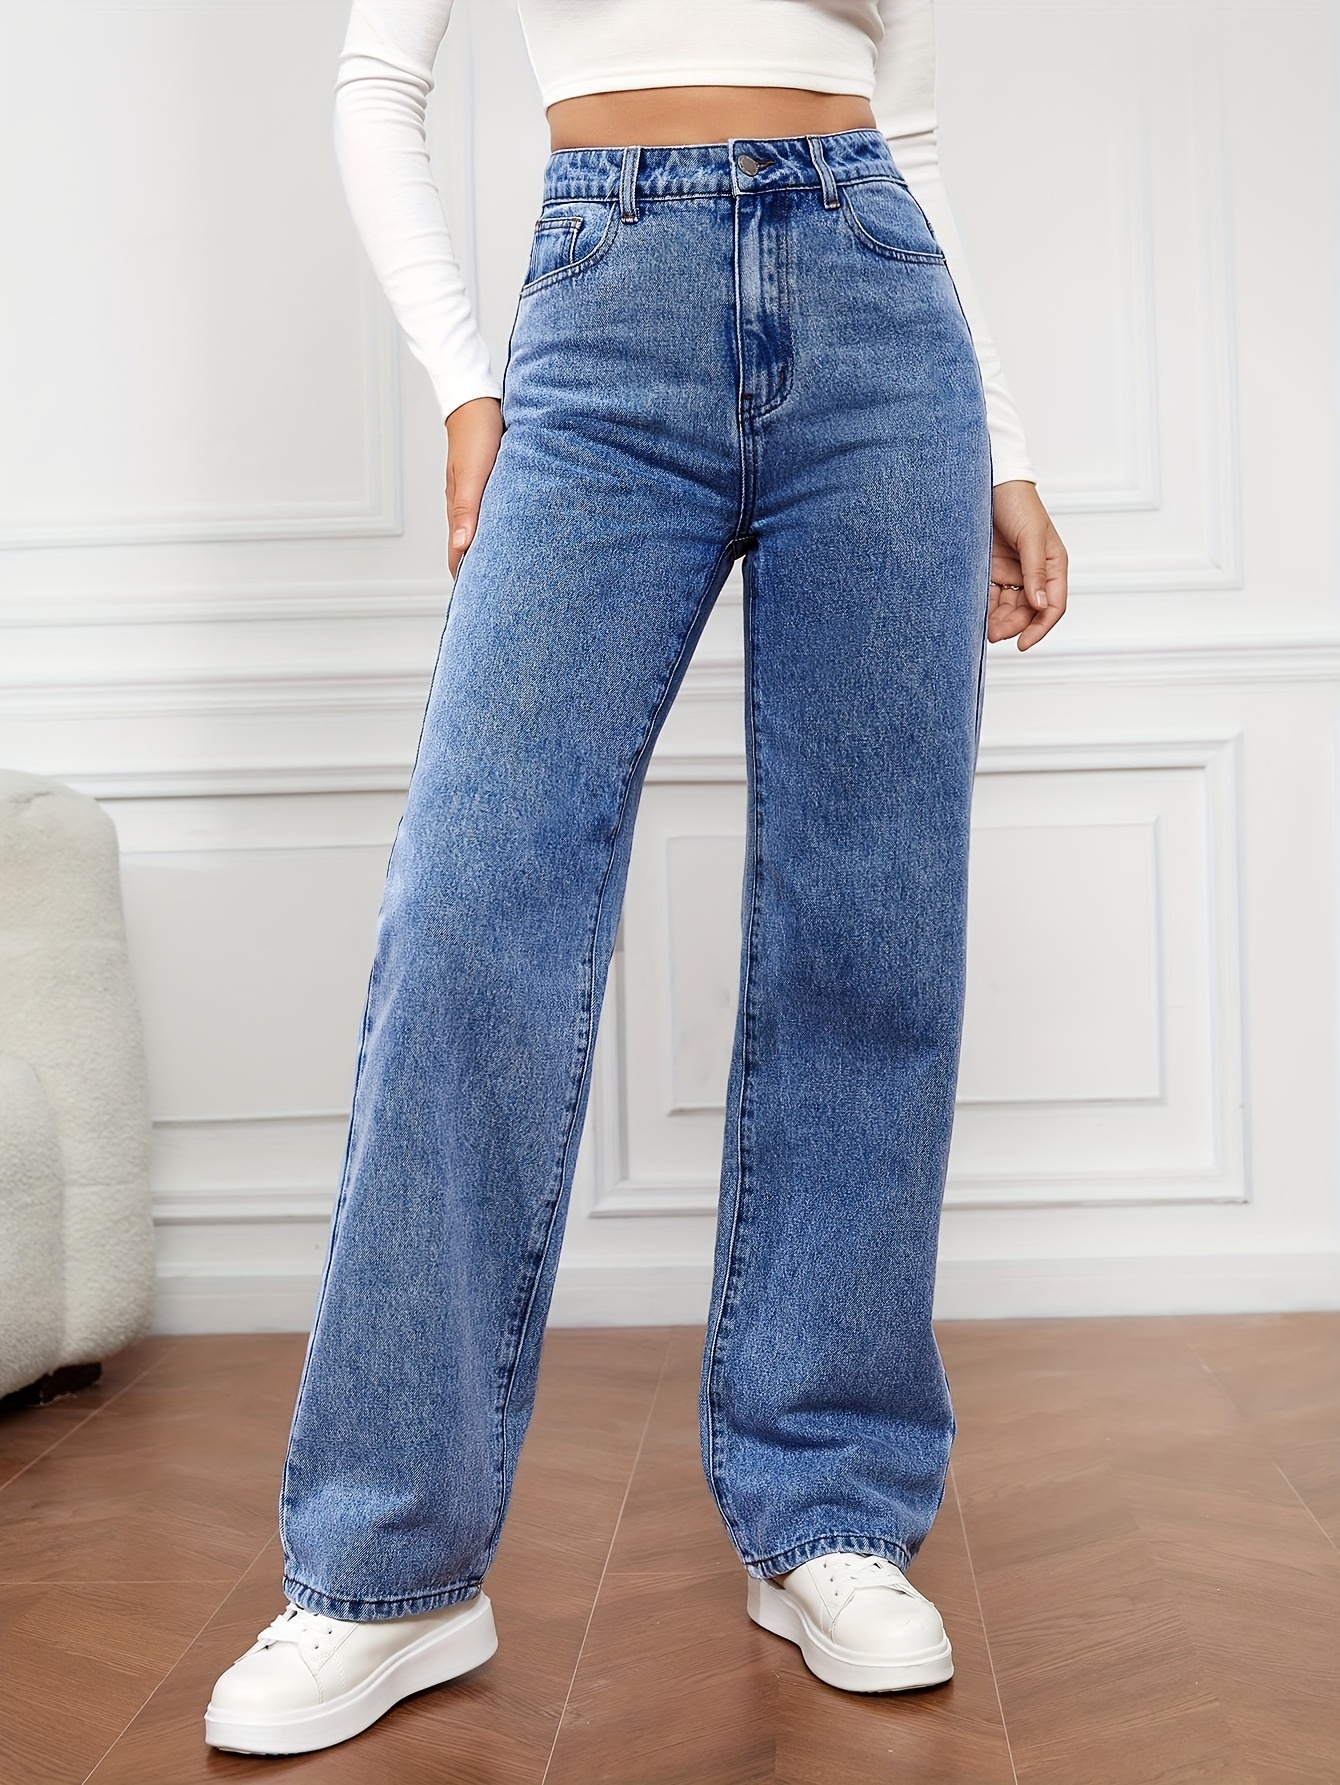 womens high waist washed jeans versatile straight leg pants casual style denim long trousers for daily wear details 2